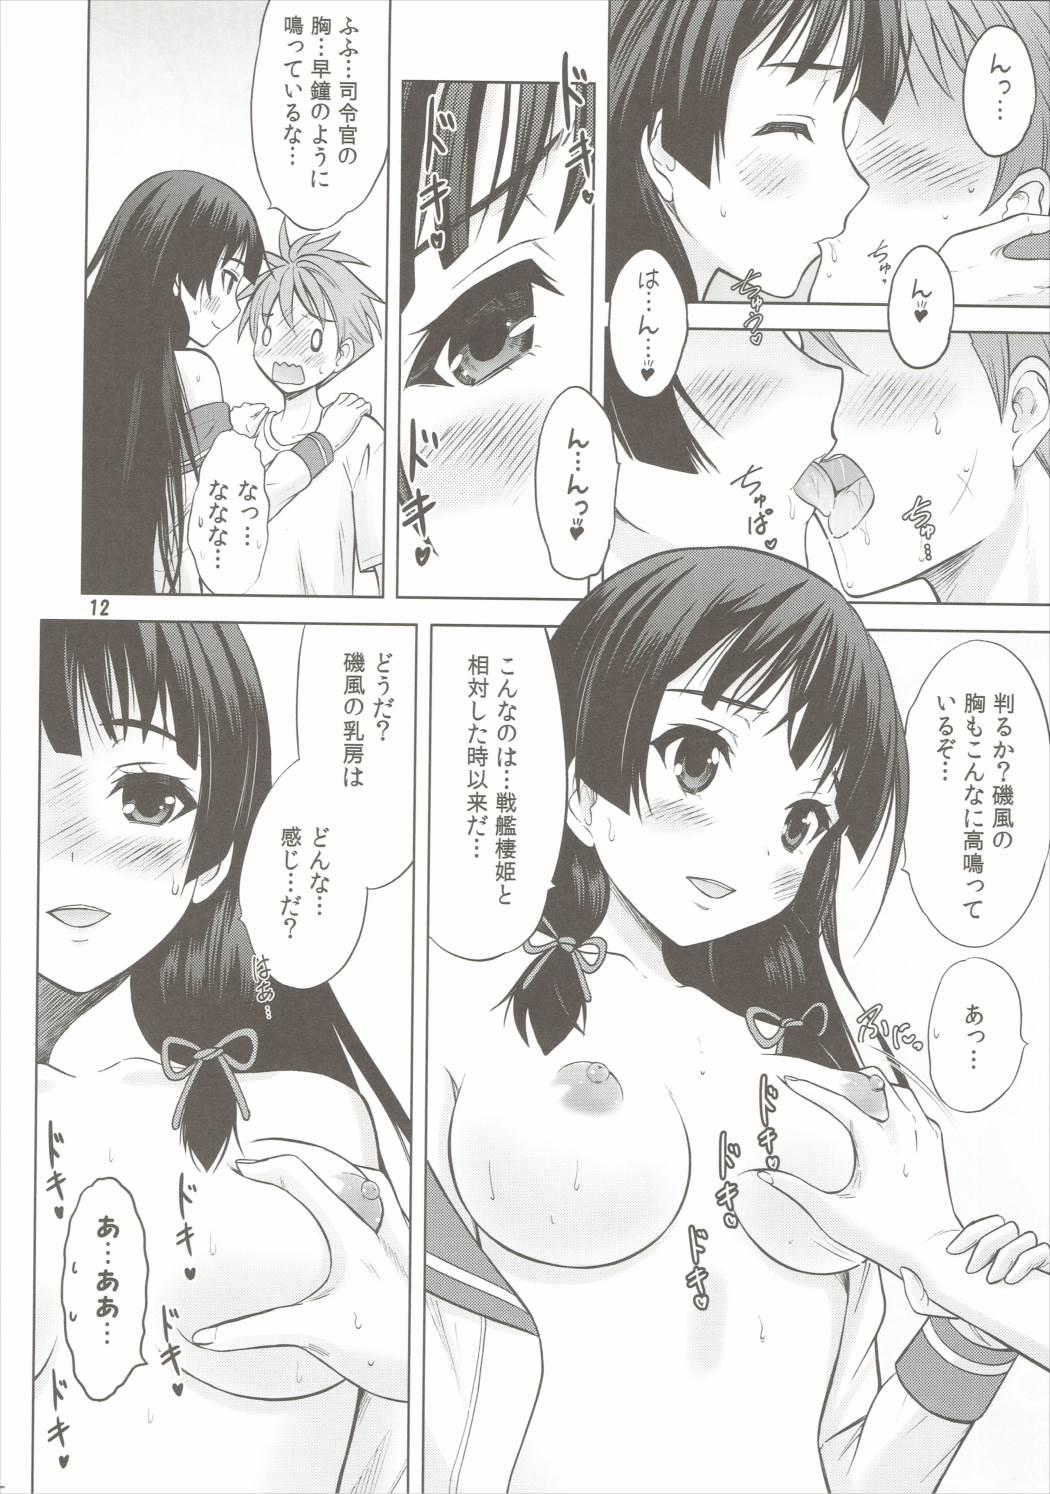 Spreading Isoiso Isokaze - Kantai collection Chat - Page 9